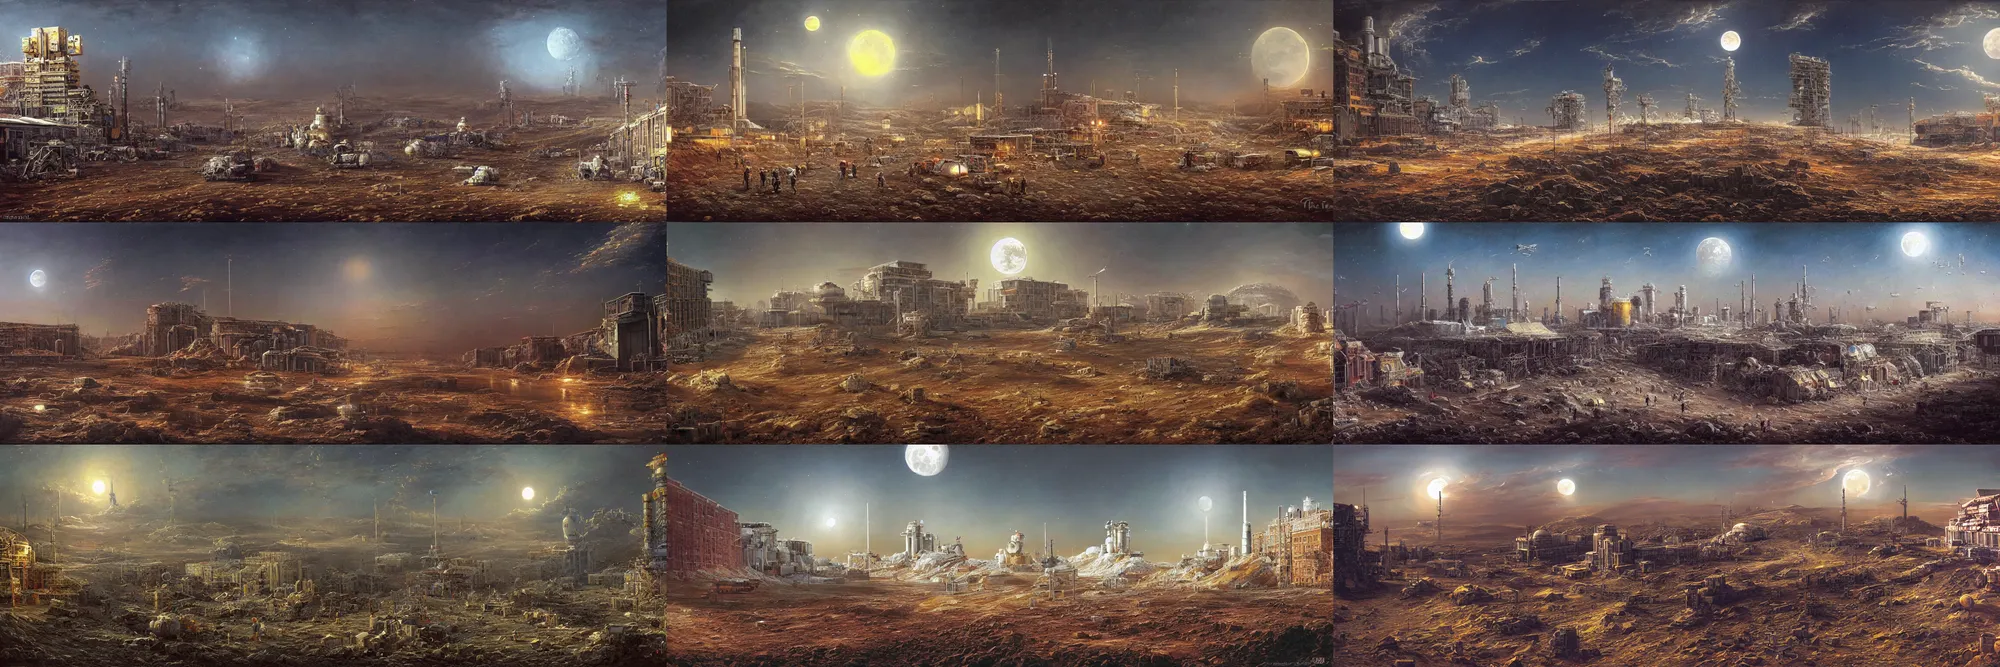 Prompt: painting of a lunar soil norilsk city, sci - fi st. petersburg, lunar soil, busy street, city street on the moon, future norilsk street base, sci - fi, detailed, by thomas cole